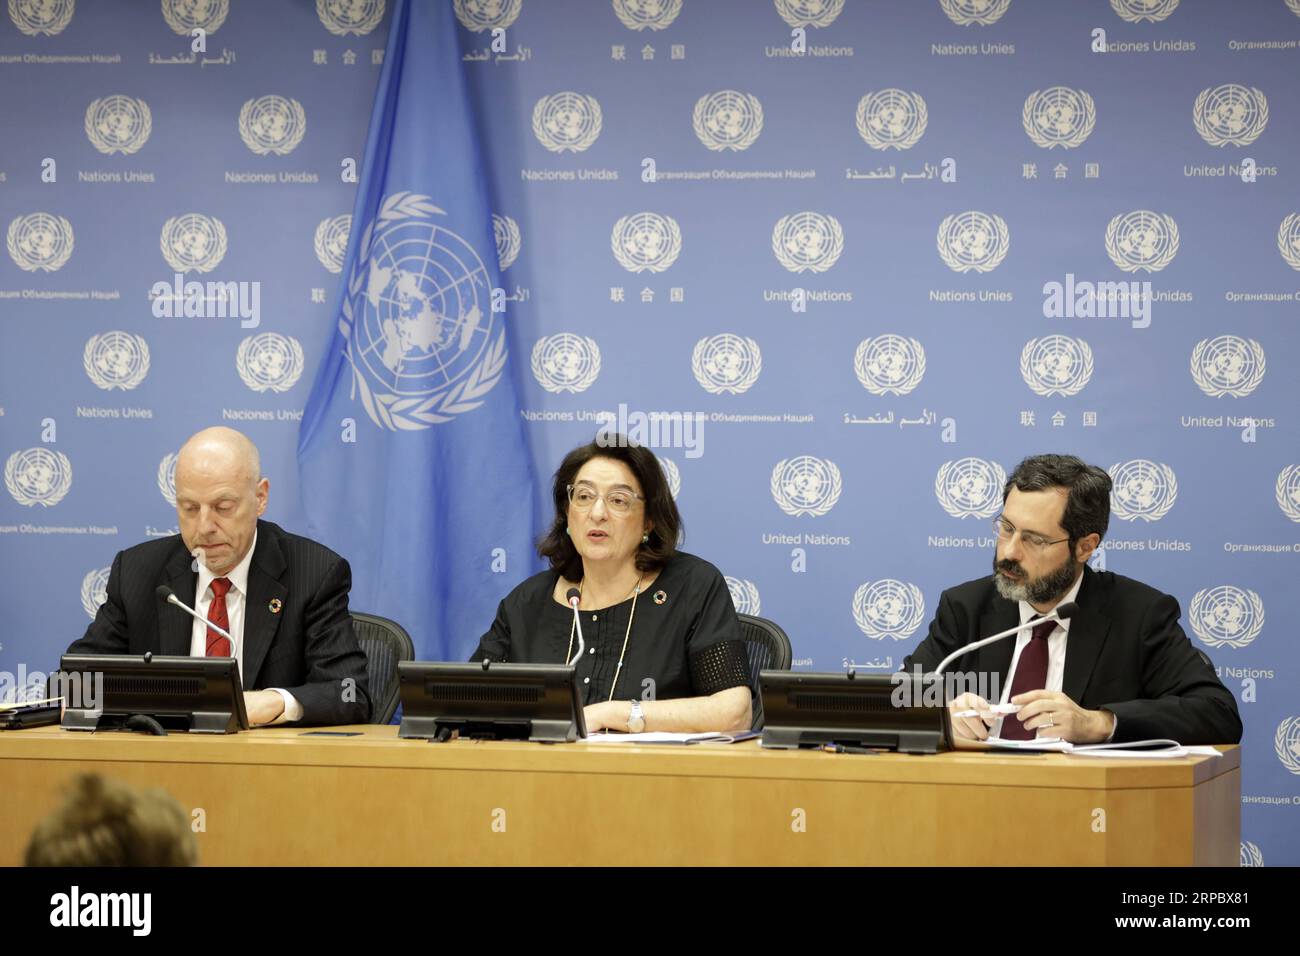 (190617) -- UNITED NATIONS, June 17, 2019 -- John Wilmoth, Director of the Population Division of the UN Department of Economic and Social Affairs (UNDESA), Maria-Francesca Spatolisano, Assistant Secretary-General for Policy Coordination and Inter-Agency Affairs in UNDESA, and Patrick Gerland, Chief of the Population Estimates and Projections Section of the Population Division of UNDESA (from L to R), brief journalists on the World Population Prospects 2019: Highlights, at the UN headquarters in New York, June 17, 2019. The world s population is expected to increase by 2 billion in the next 30 Stock Photo